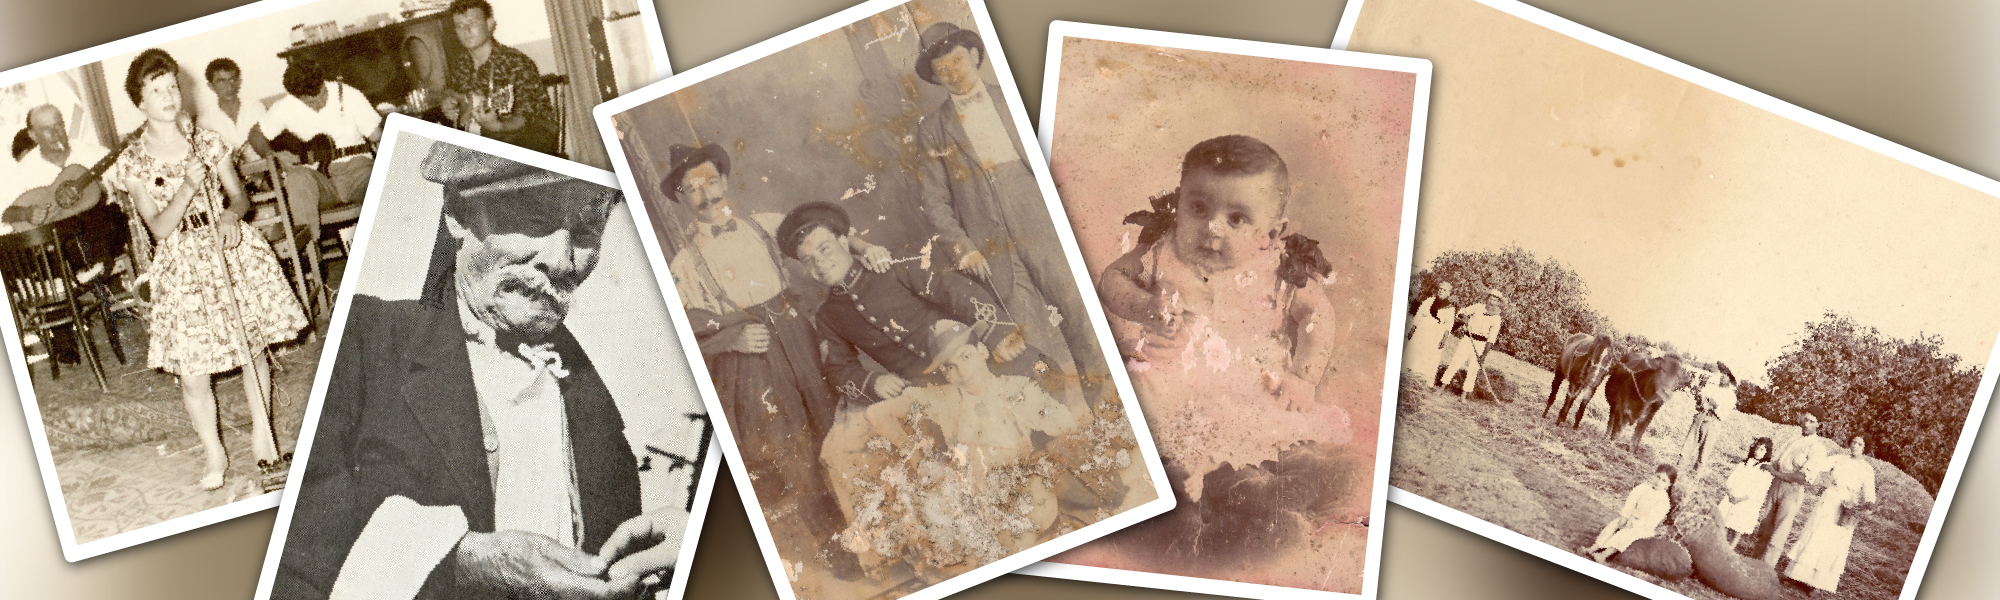 5 Old photographs